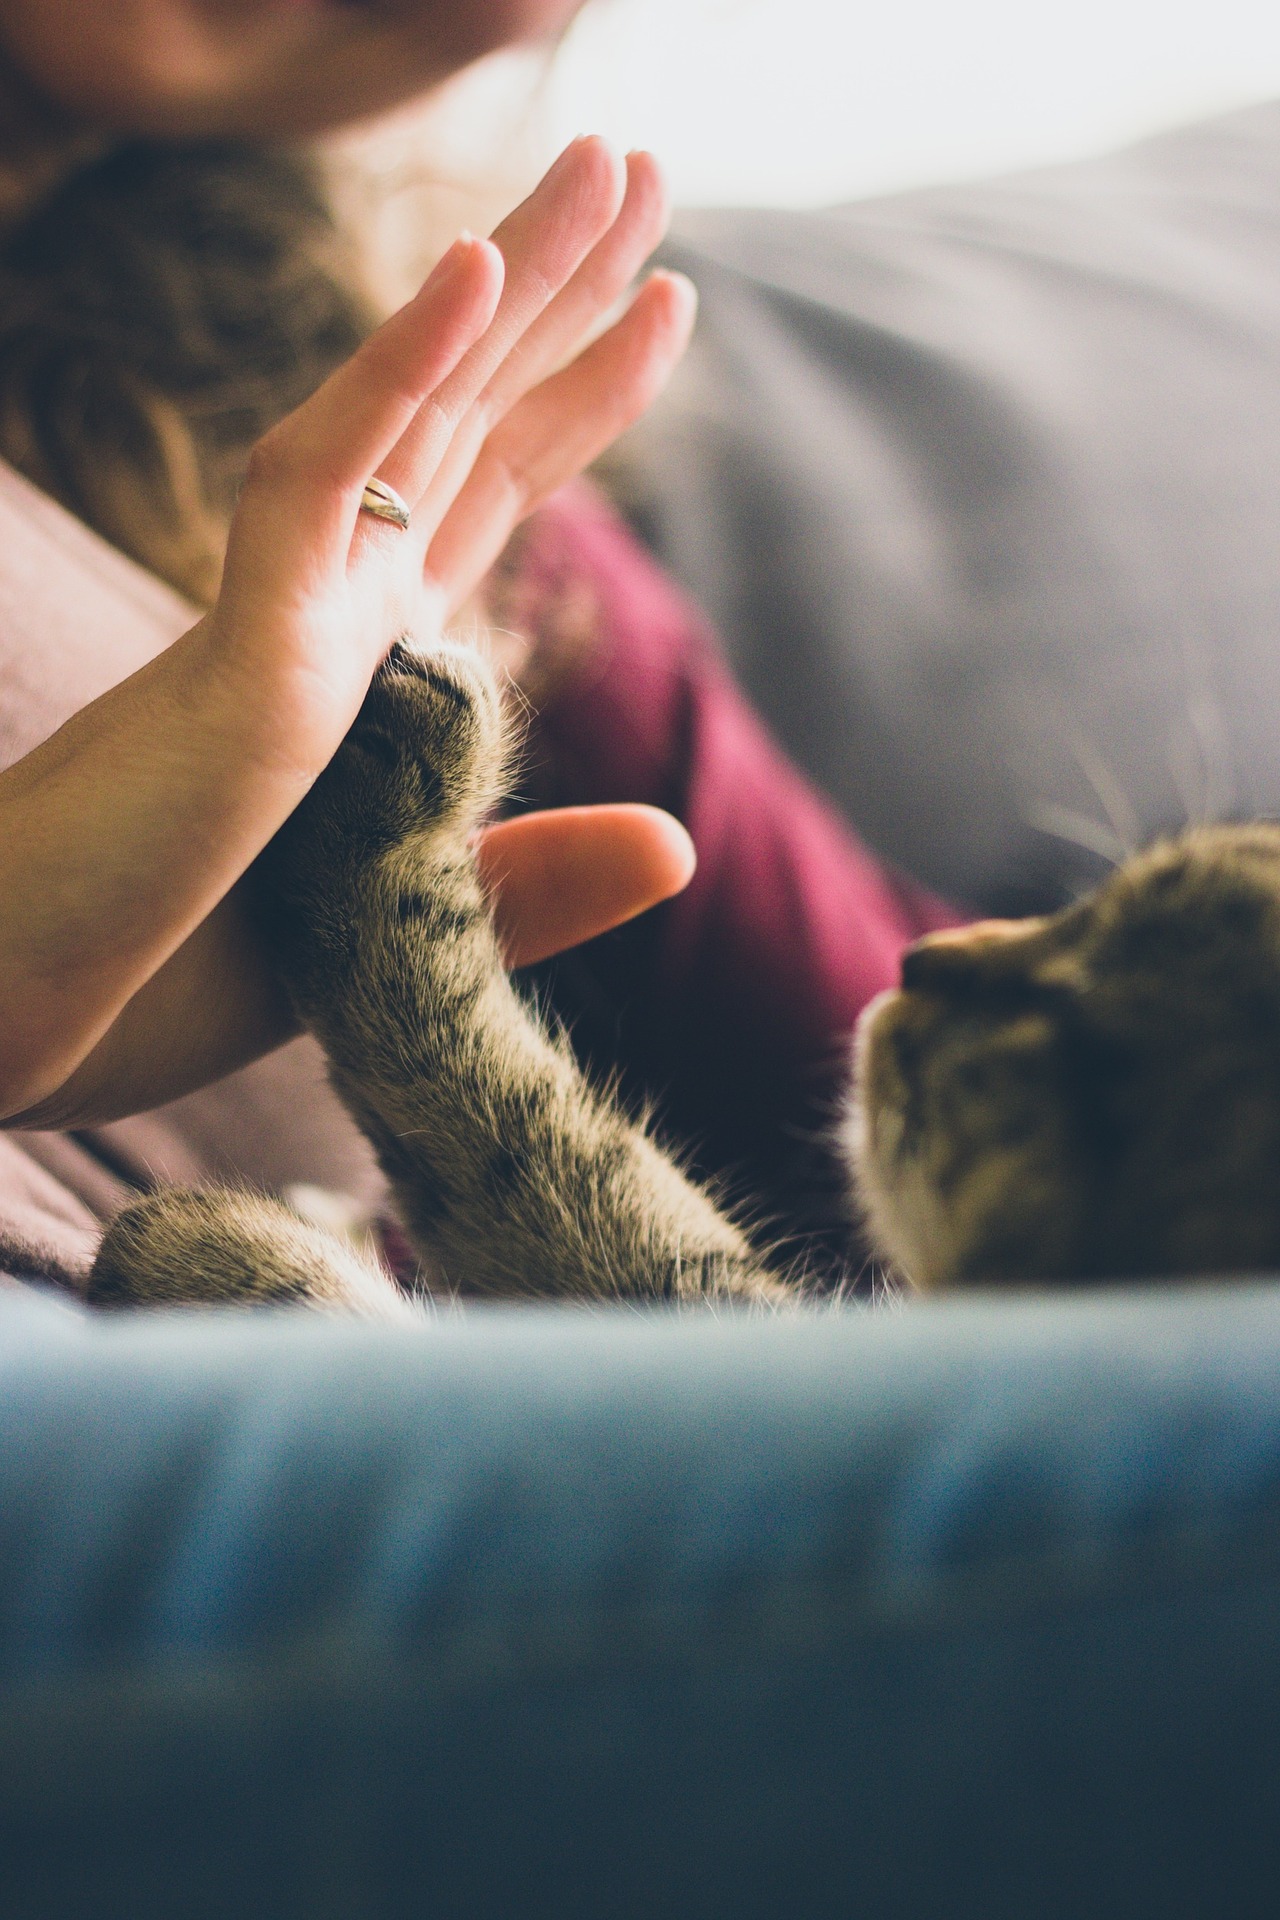 5 Fun Things to Do with Your Favorite Kitty